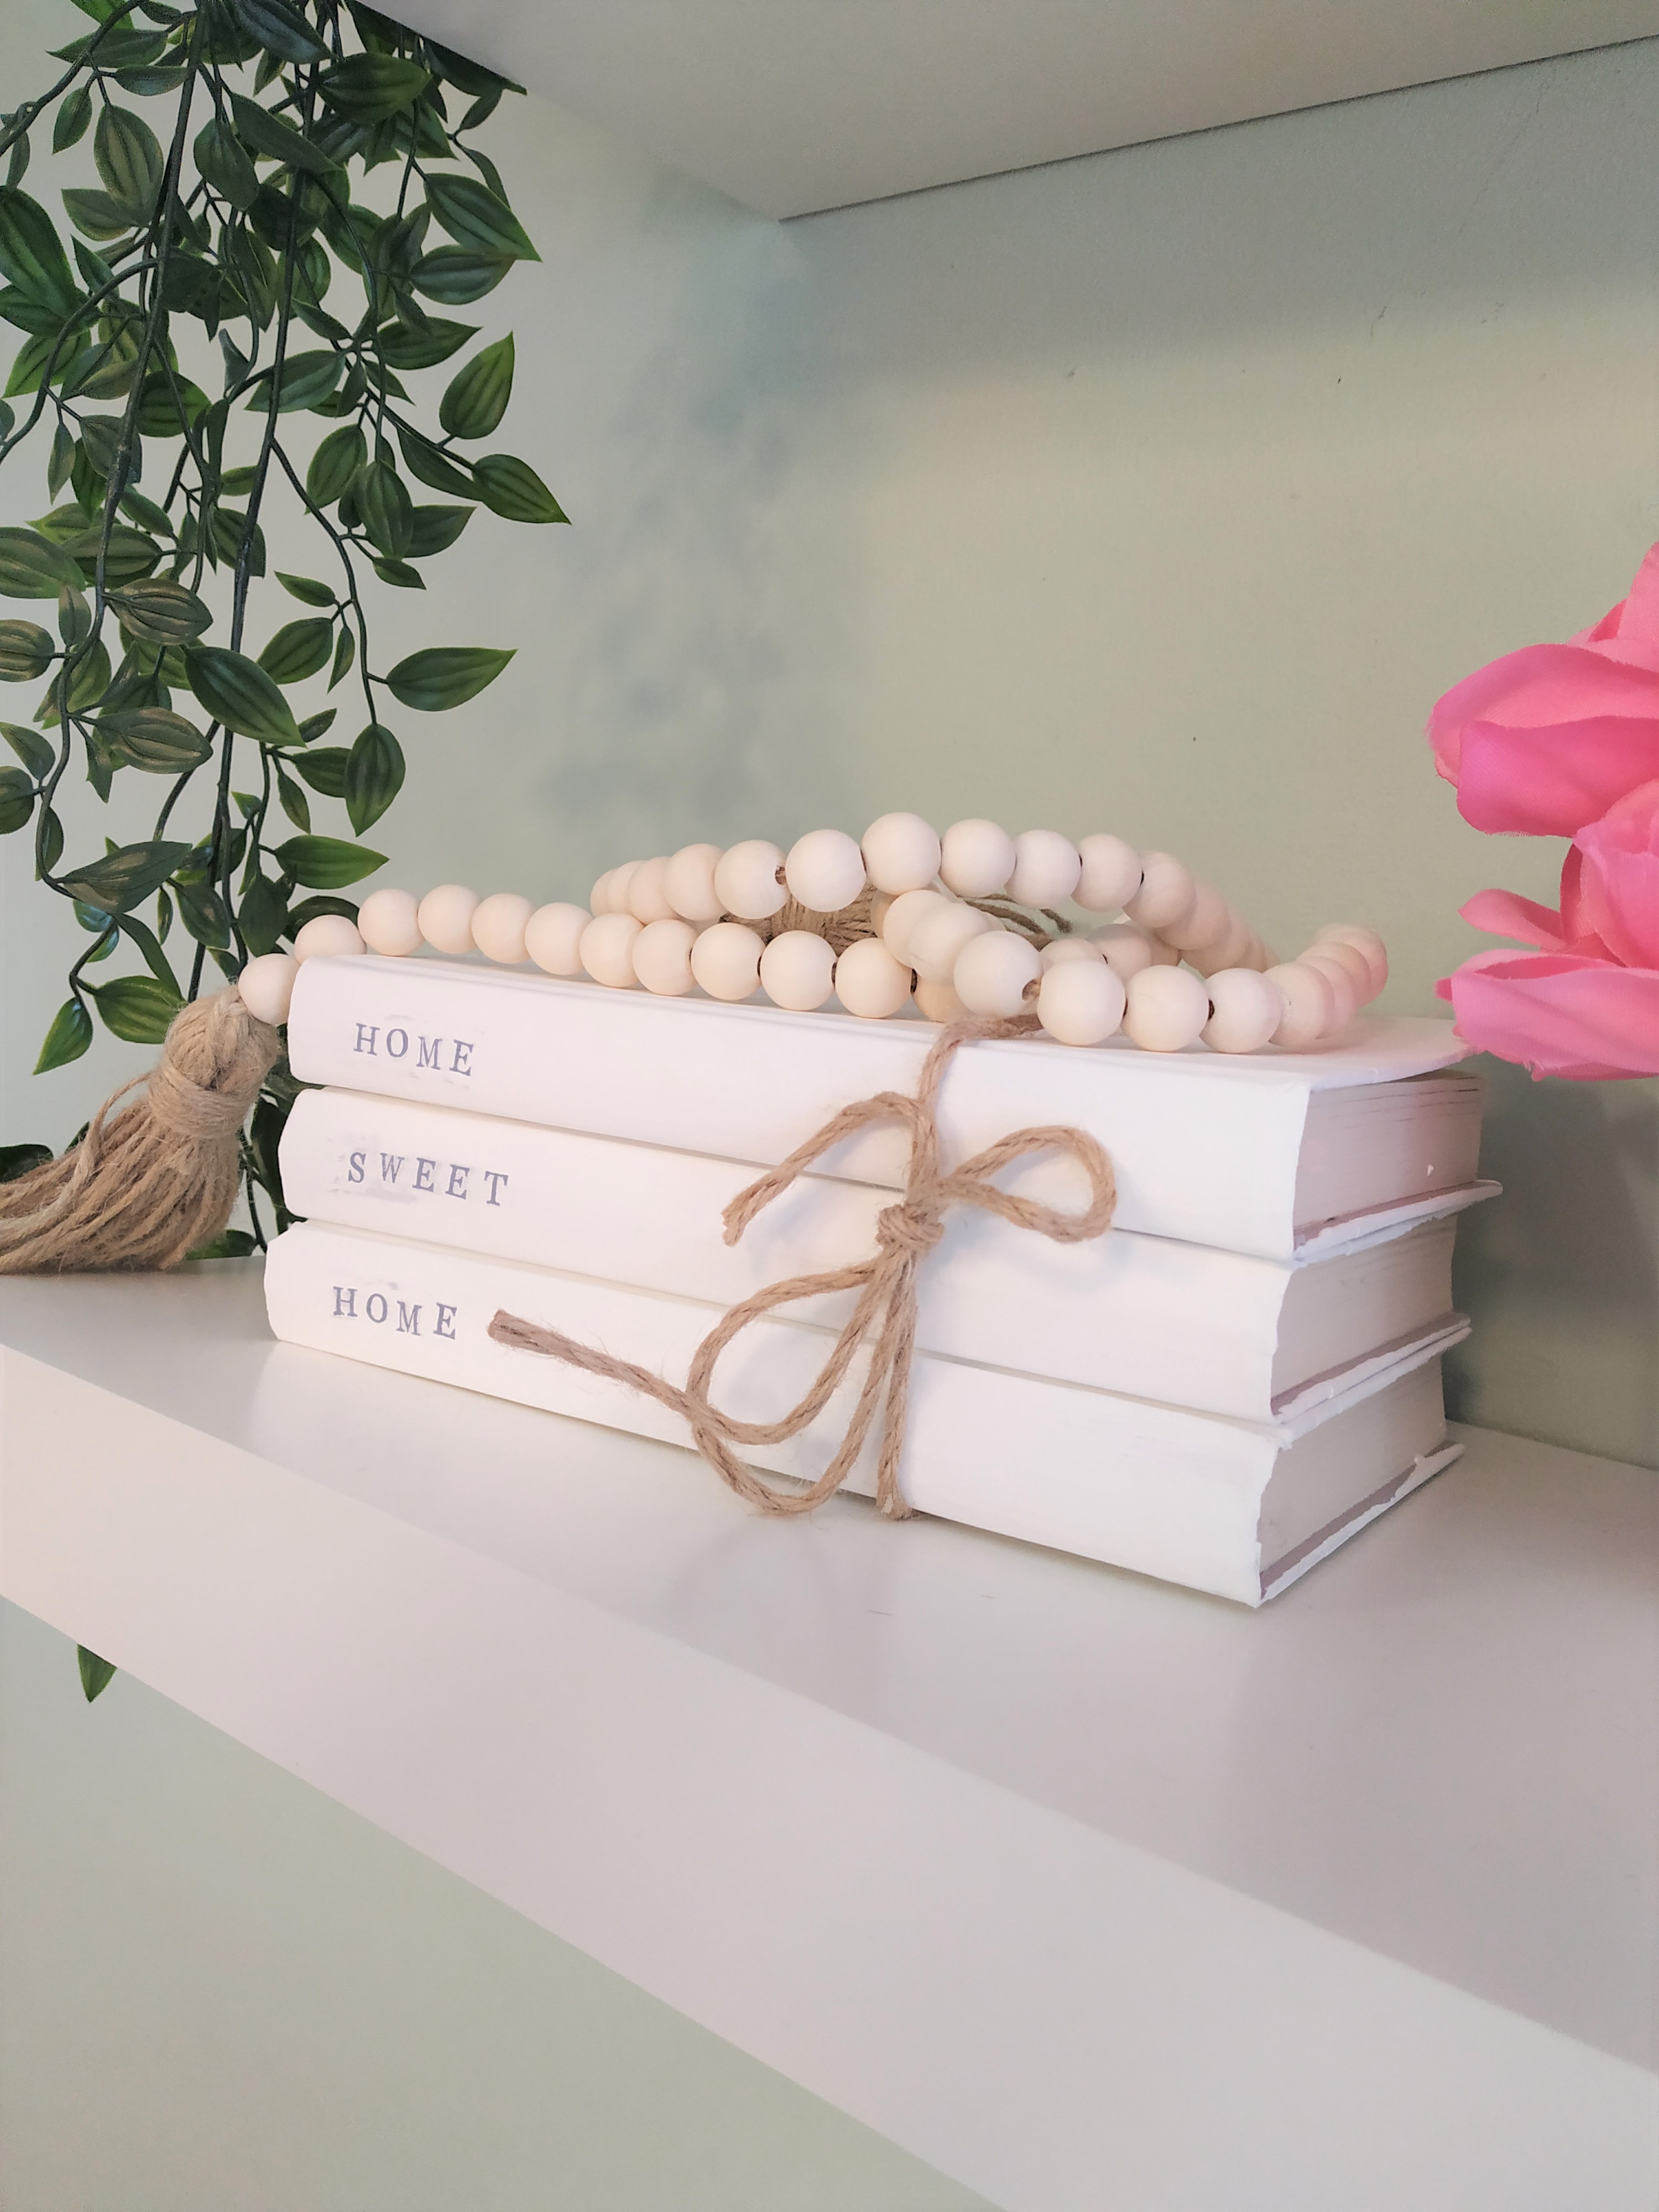 DIY GLAM DESIGNER BOOK STACK OUT OF GIFT BOXES 